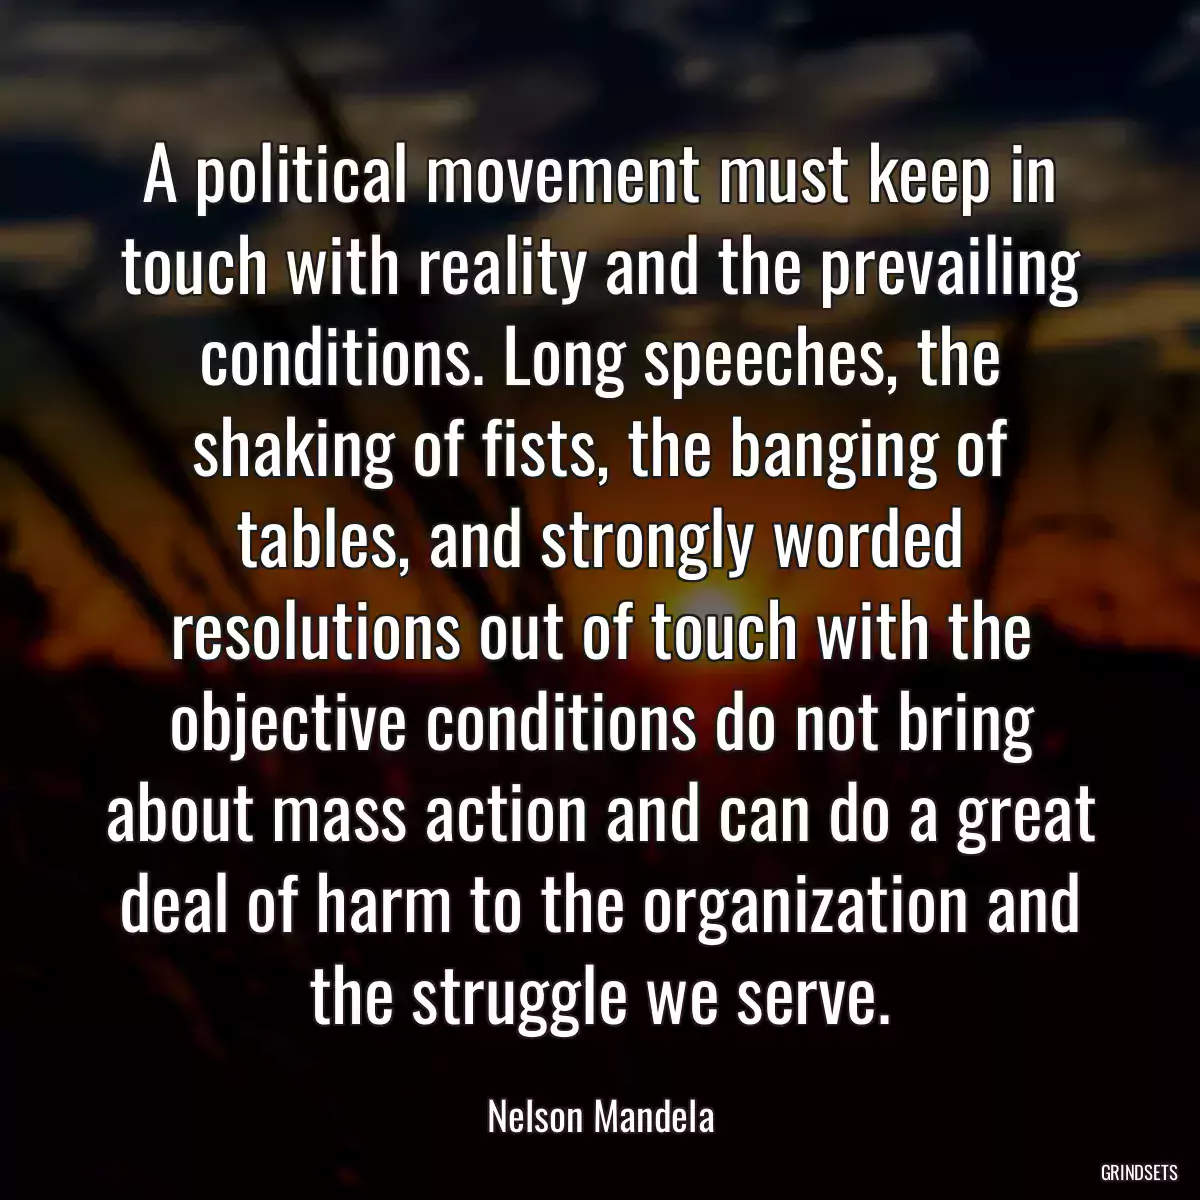 A political movement must keep in touch with reality and the prevailing conditions. Long speeches, the shaking of fists, the banging of tables, and strongly worded resolutions out of touch with the objective conditions do not bring about mass action and can do a great deal of harm to the organization and the struggle we serve.